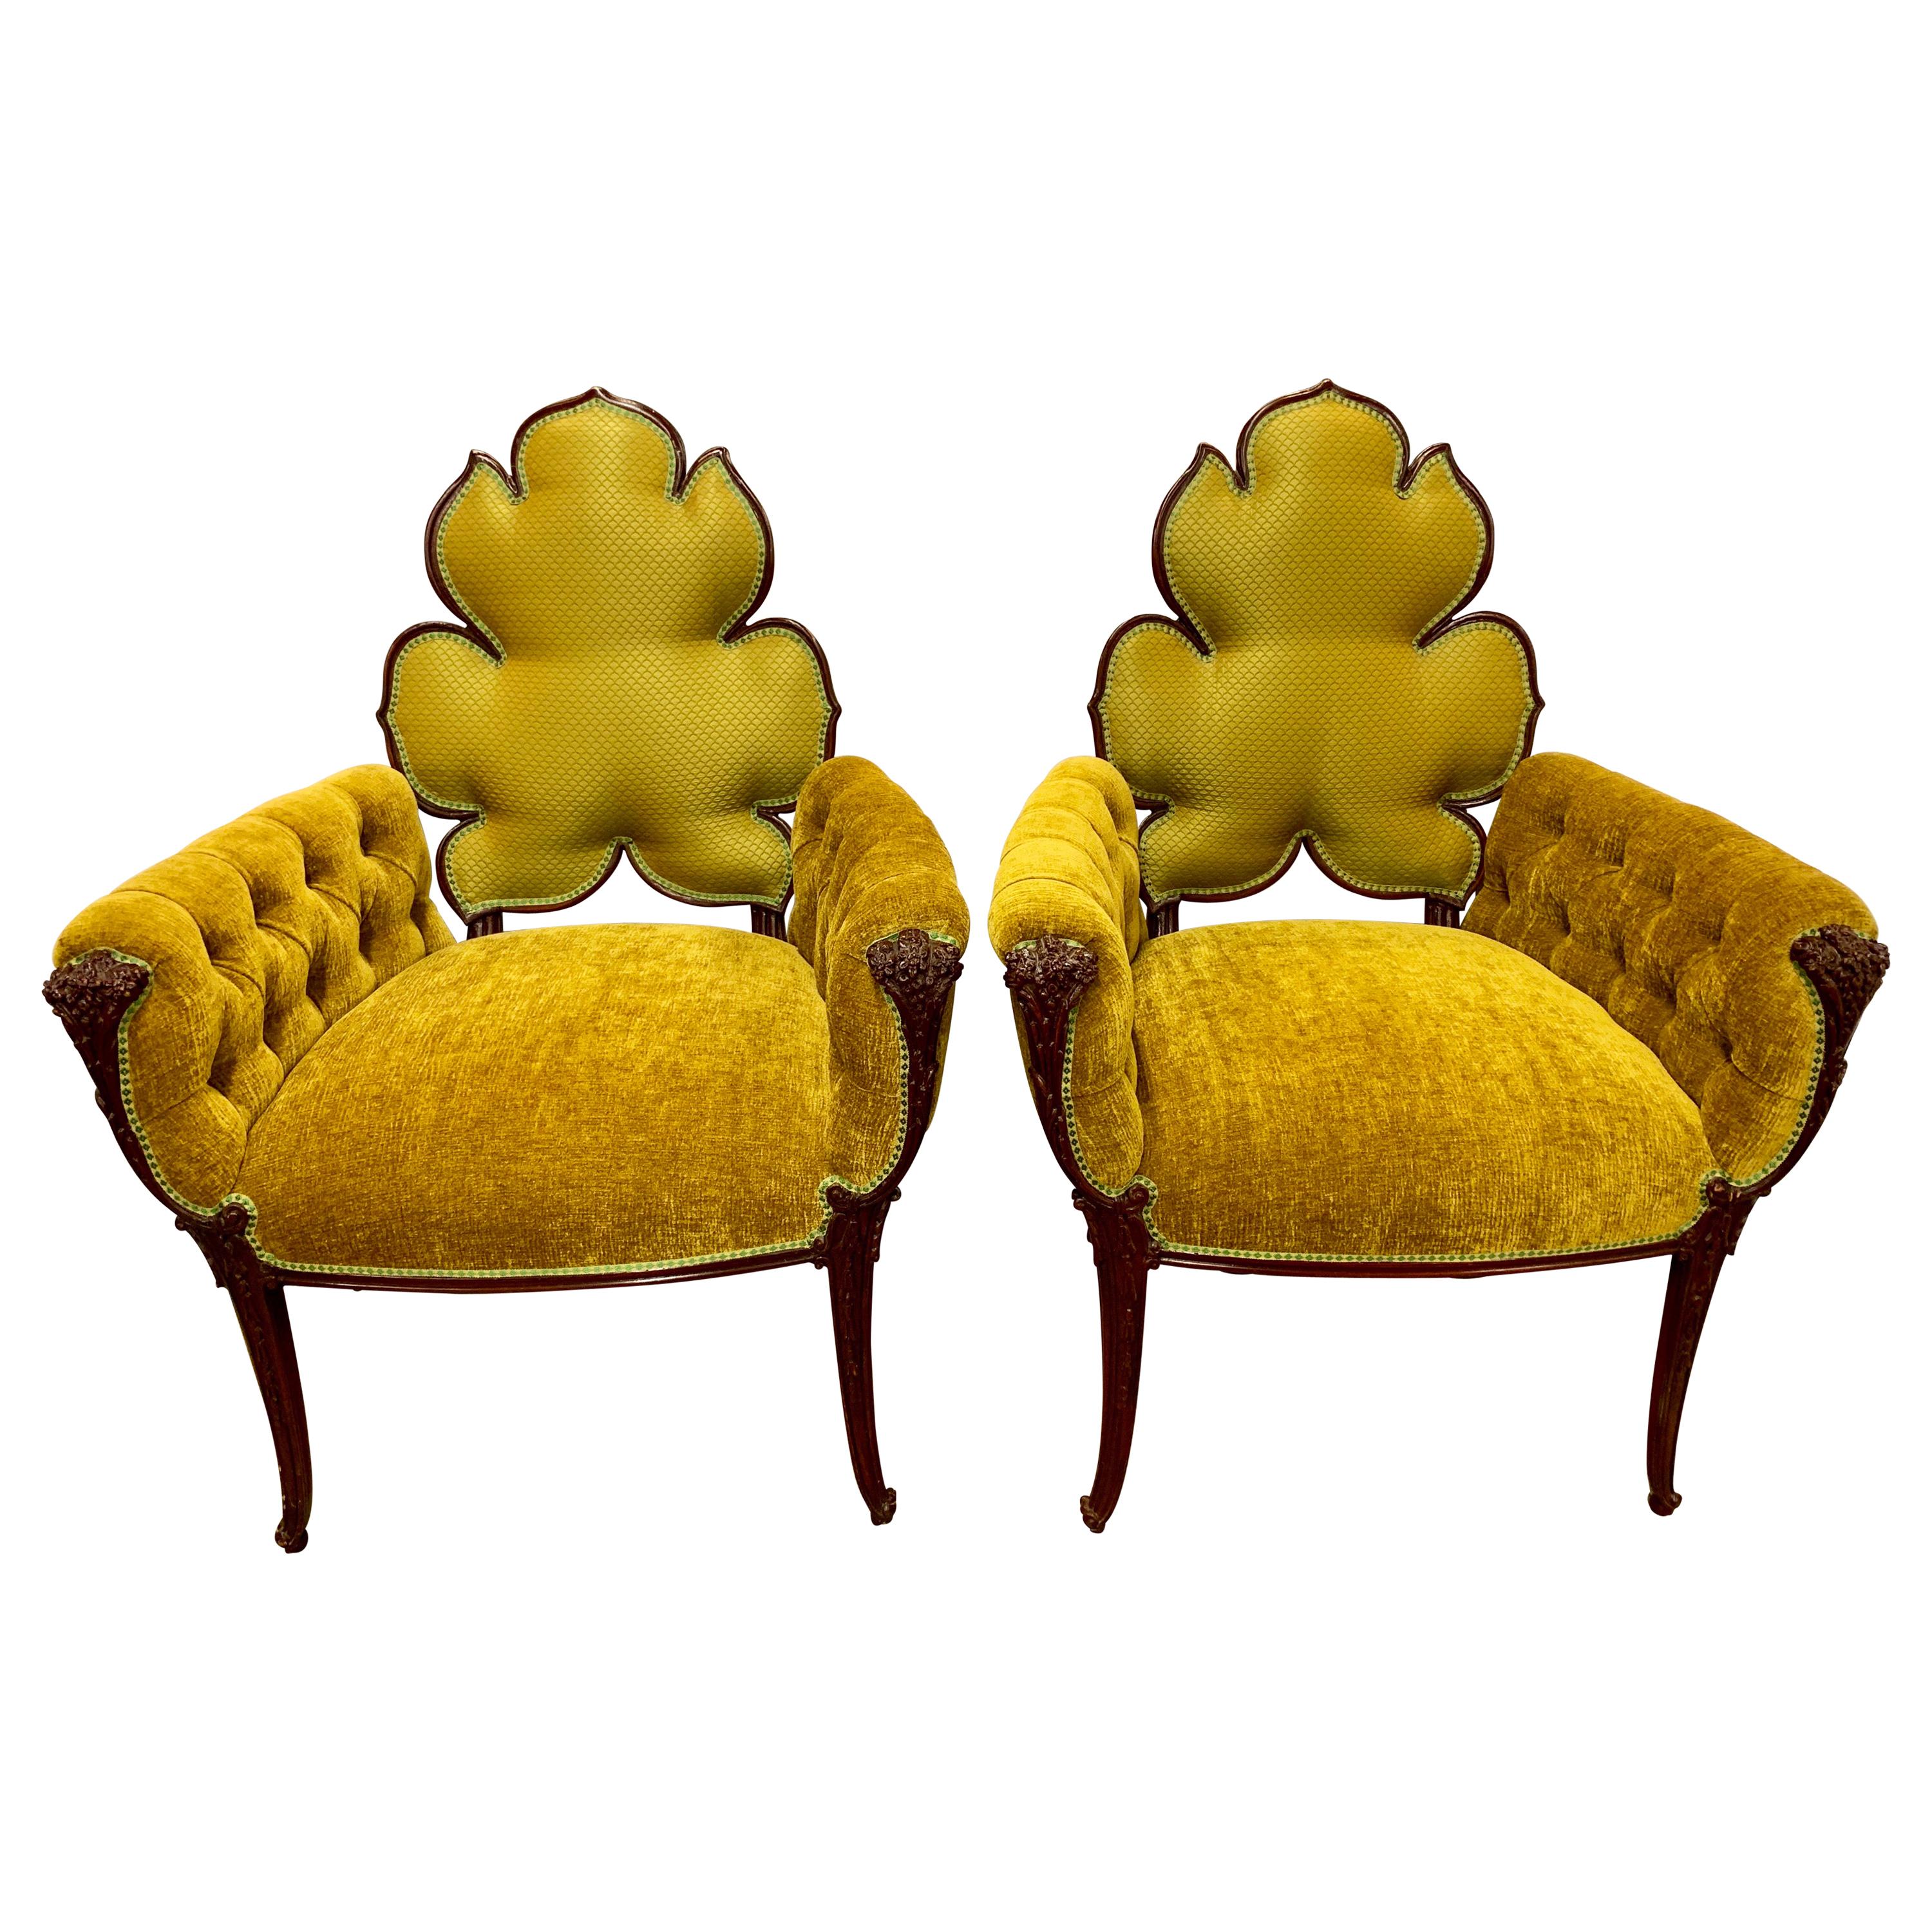 Pair of Tufted Gold Velvet Mahogany Chairs Armchairs